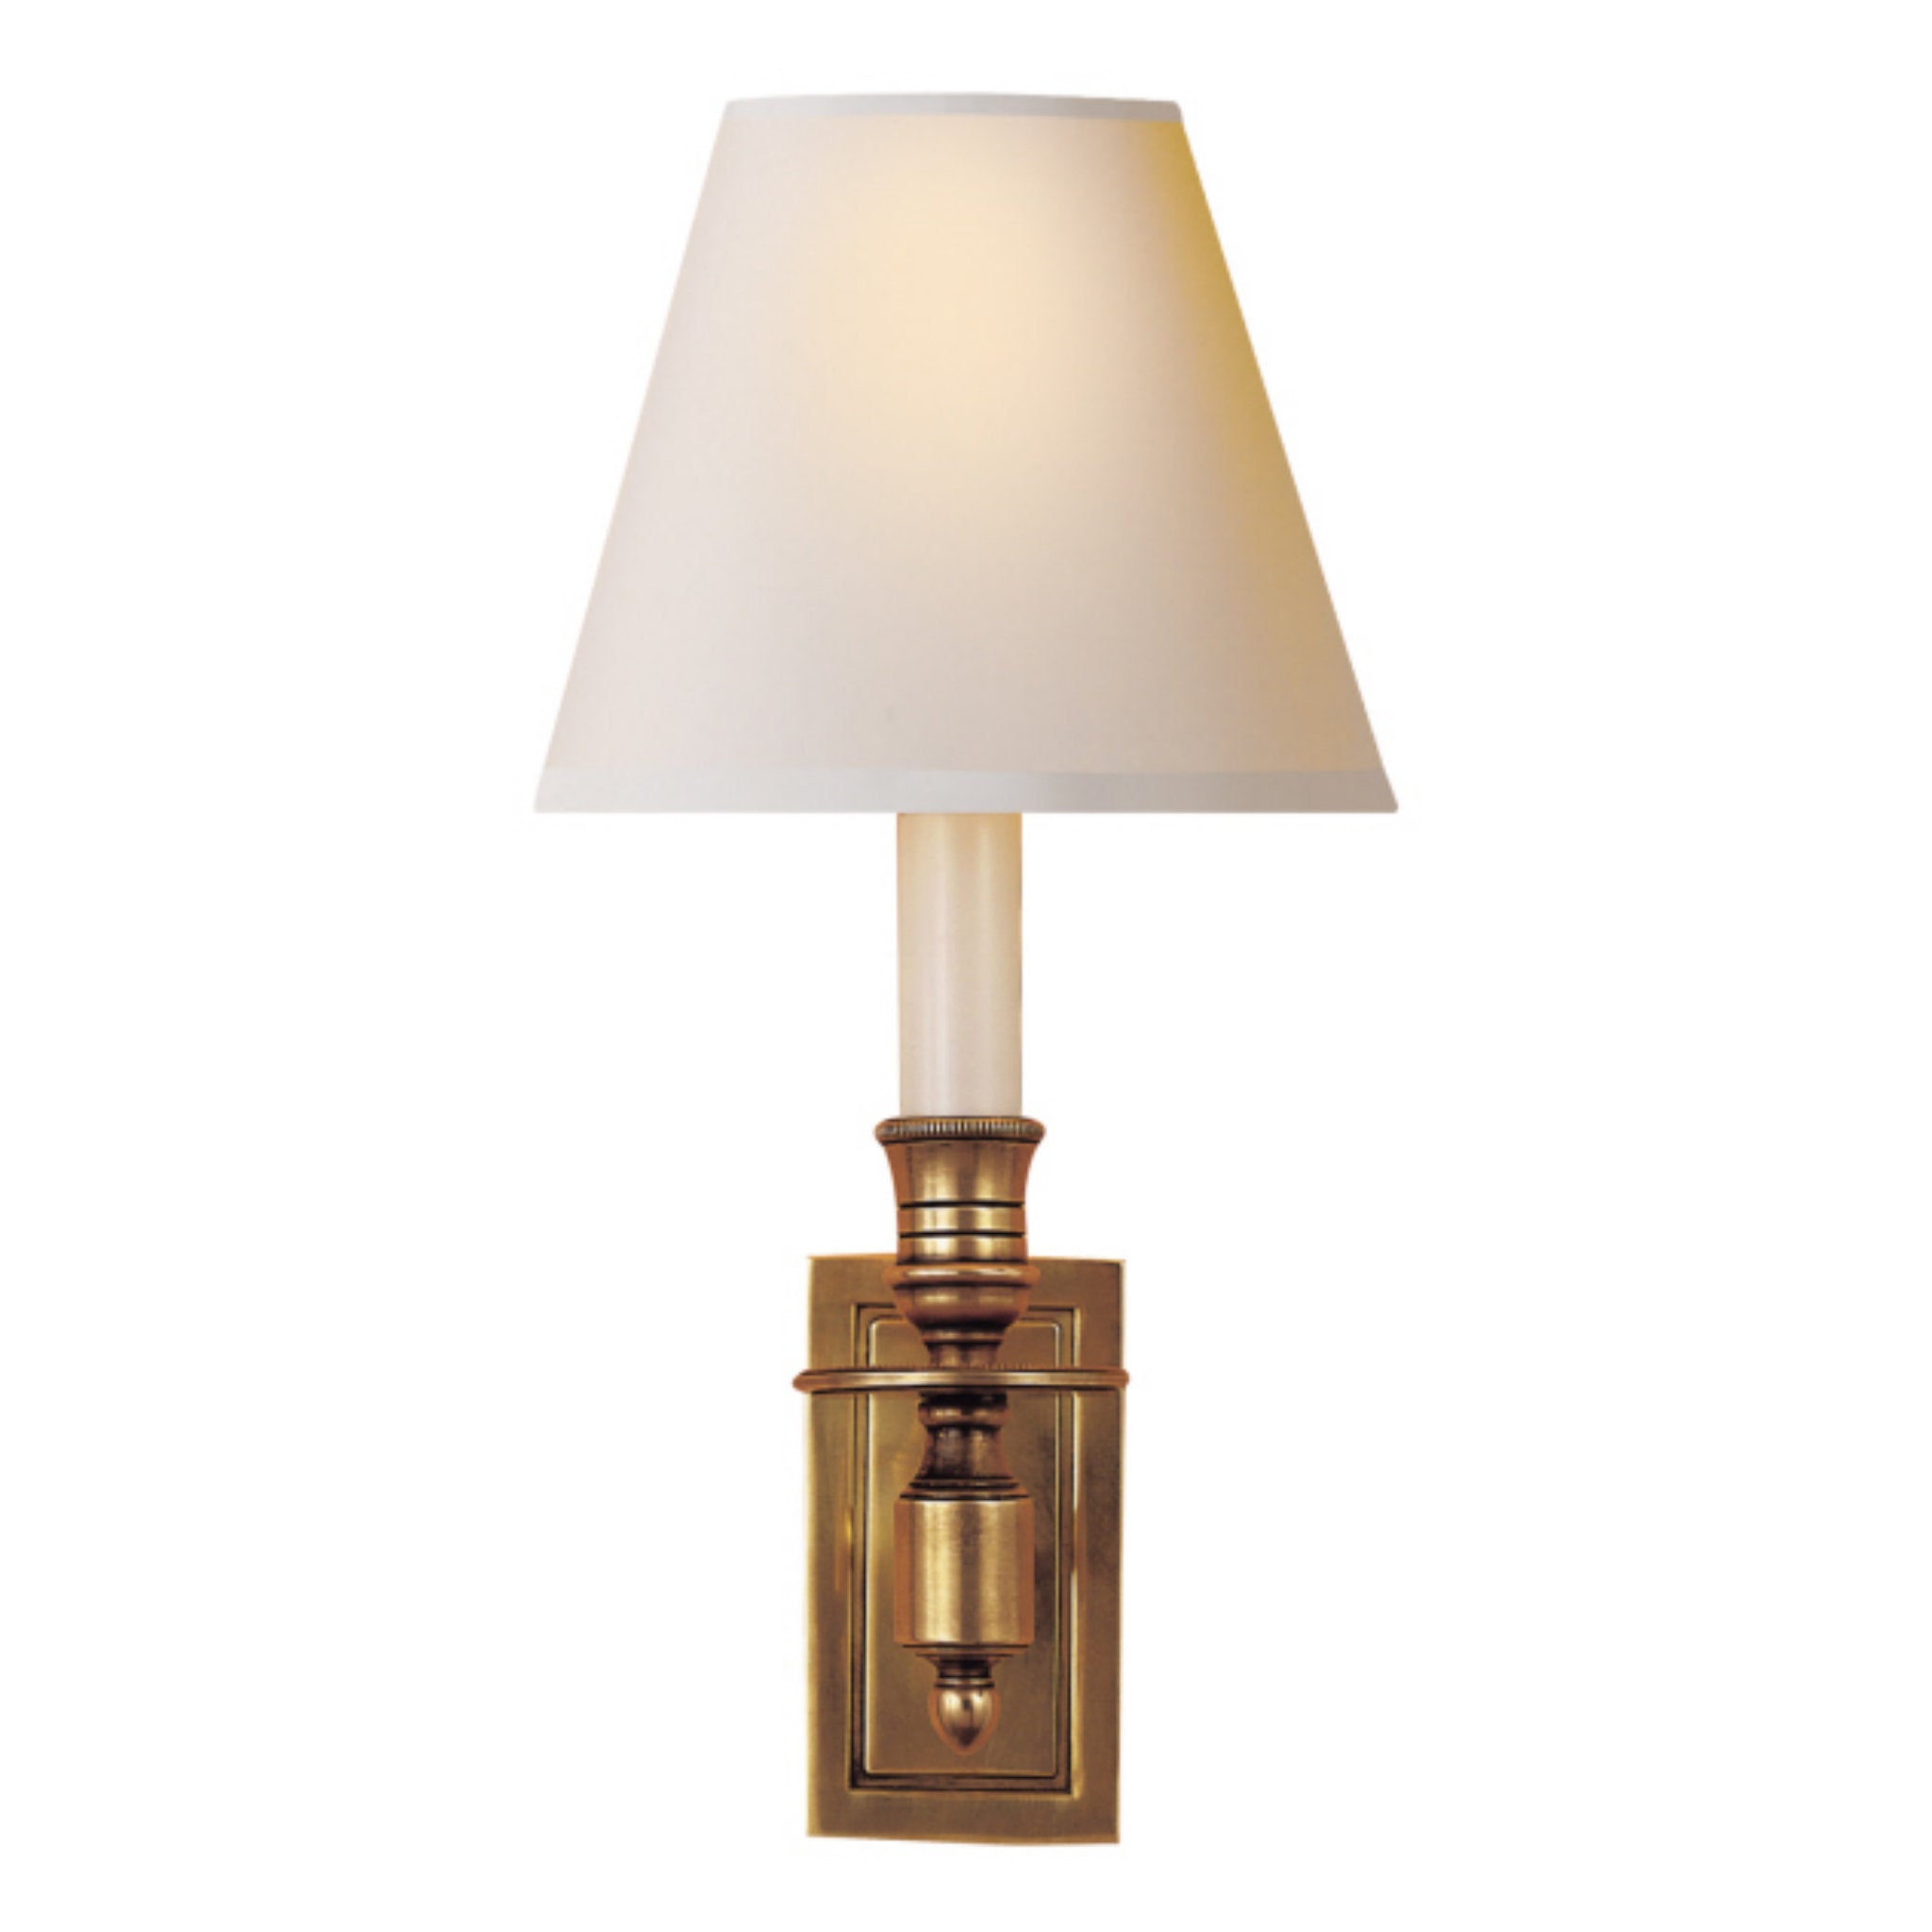 Visual Comfort French Single Library Sconce in Hand-Rubbed Antique Brass with Natural Paper Shade